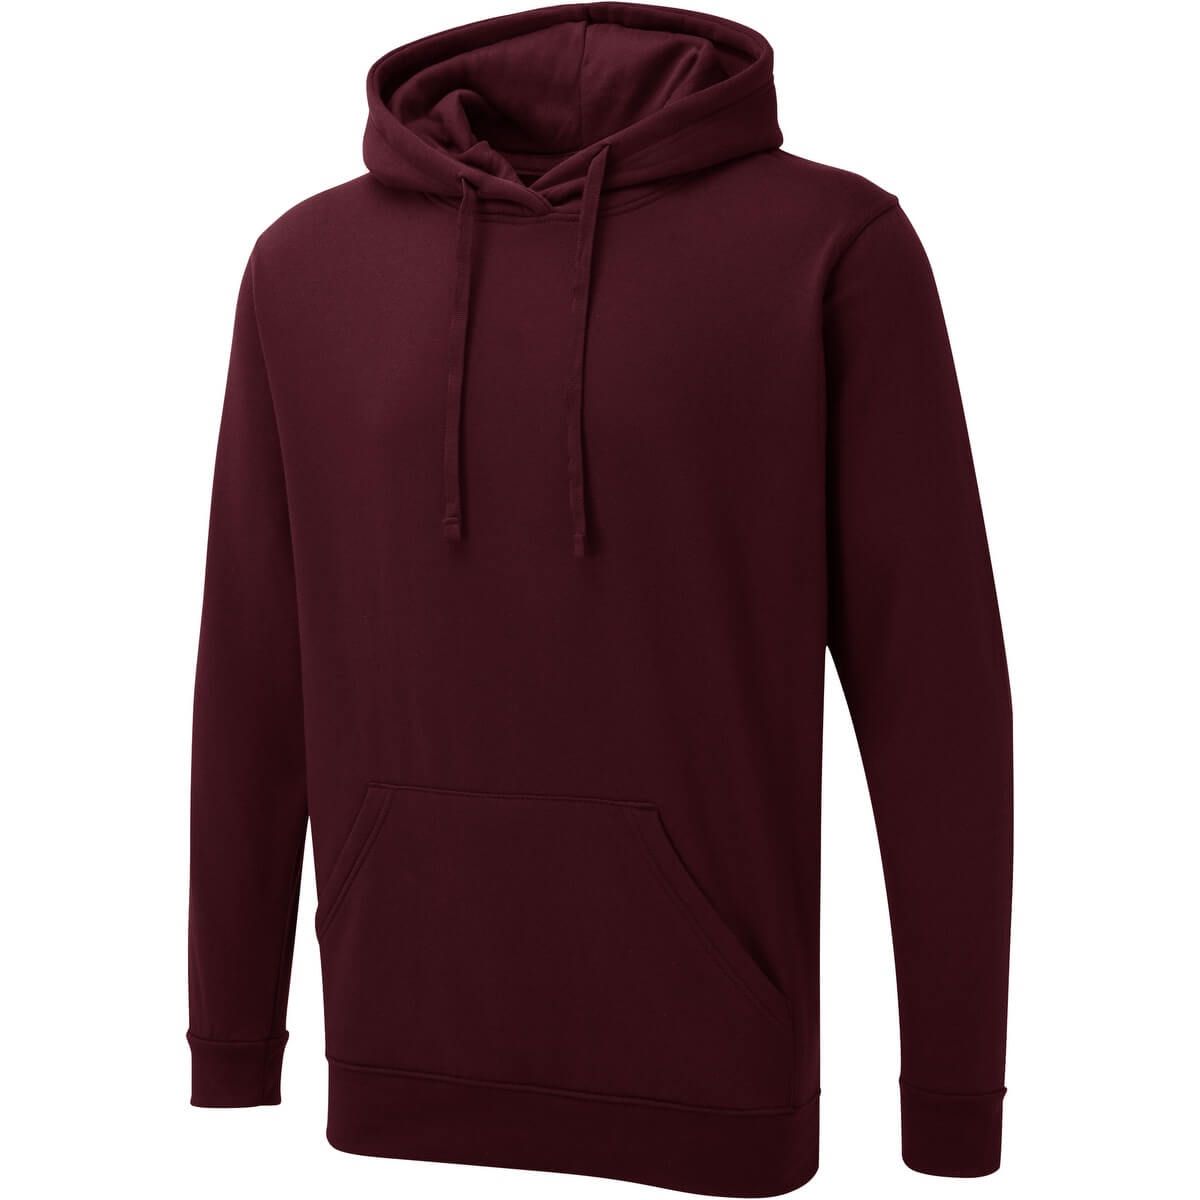 Uneek Clothing UX4 The UX Hoodie 50% Polyester 50% Cotton